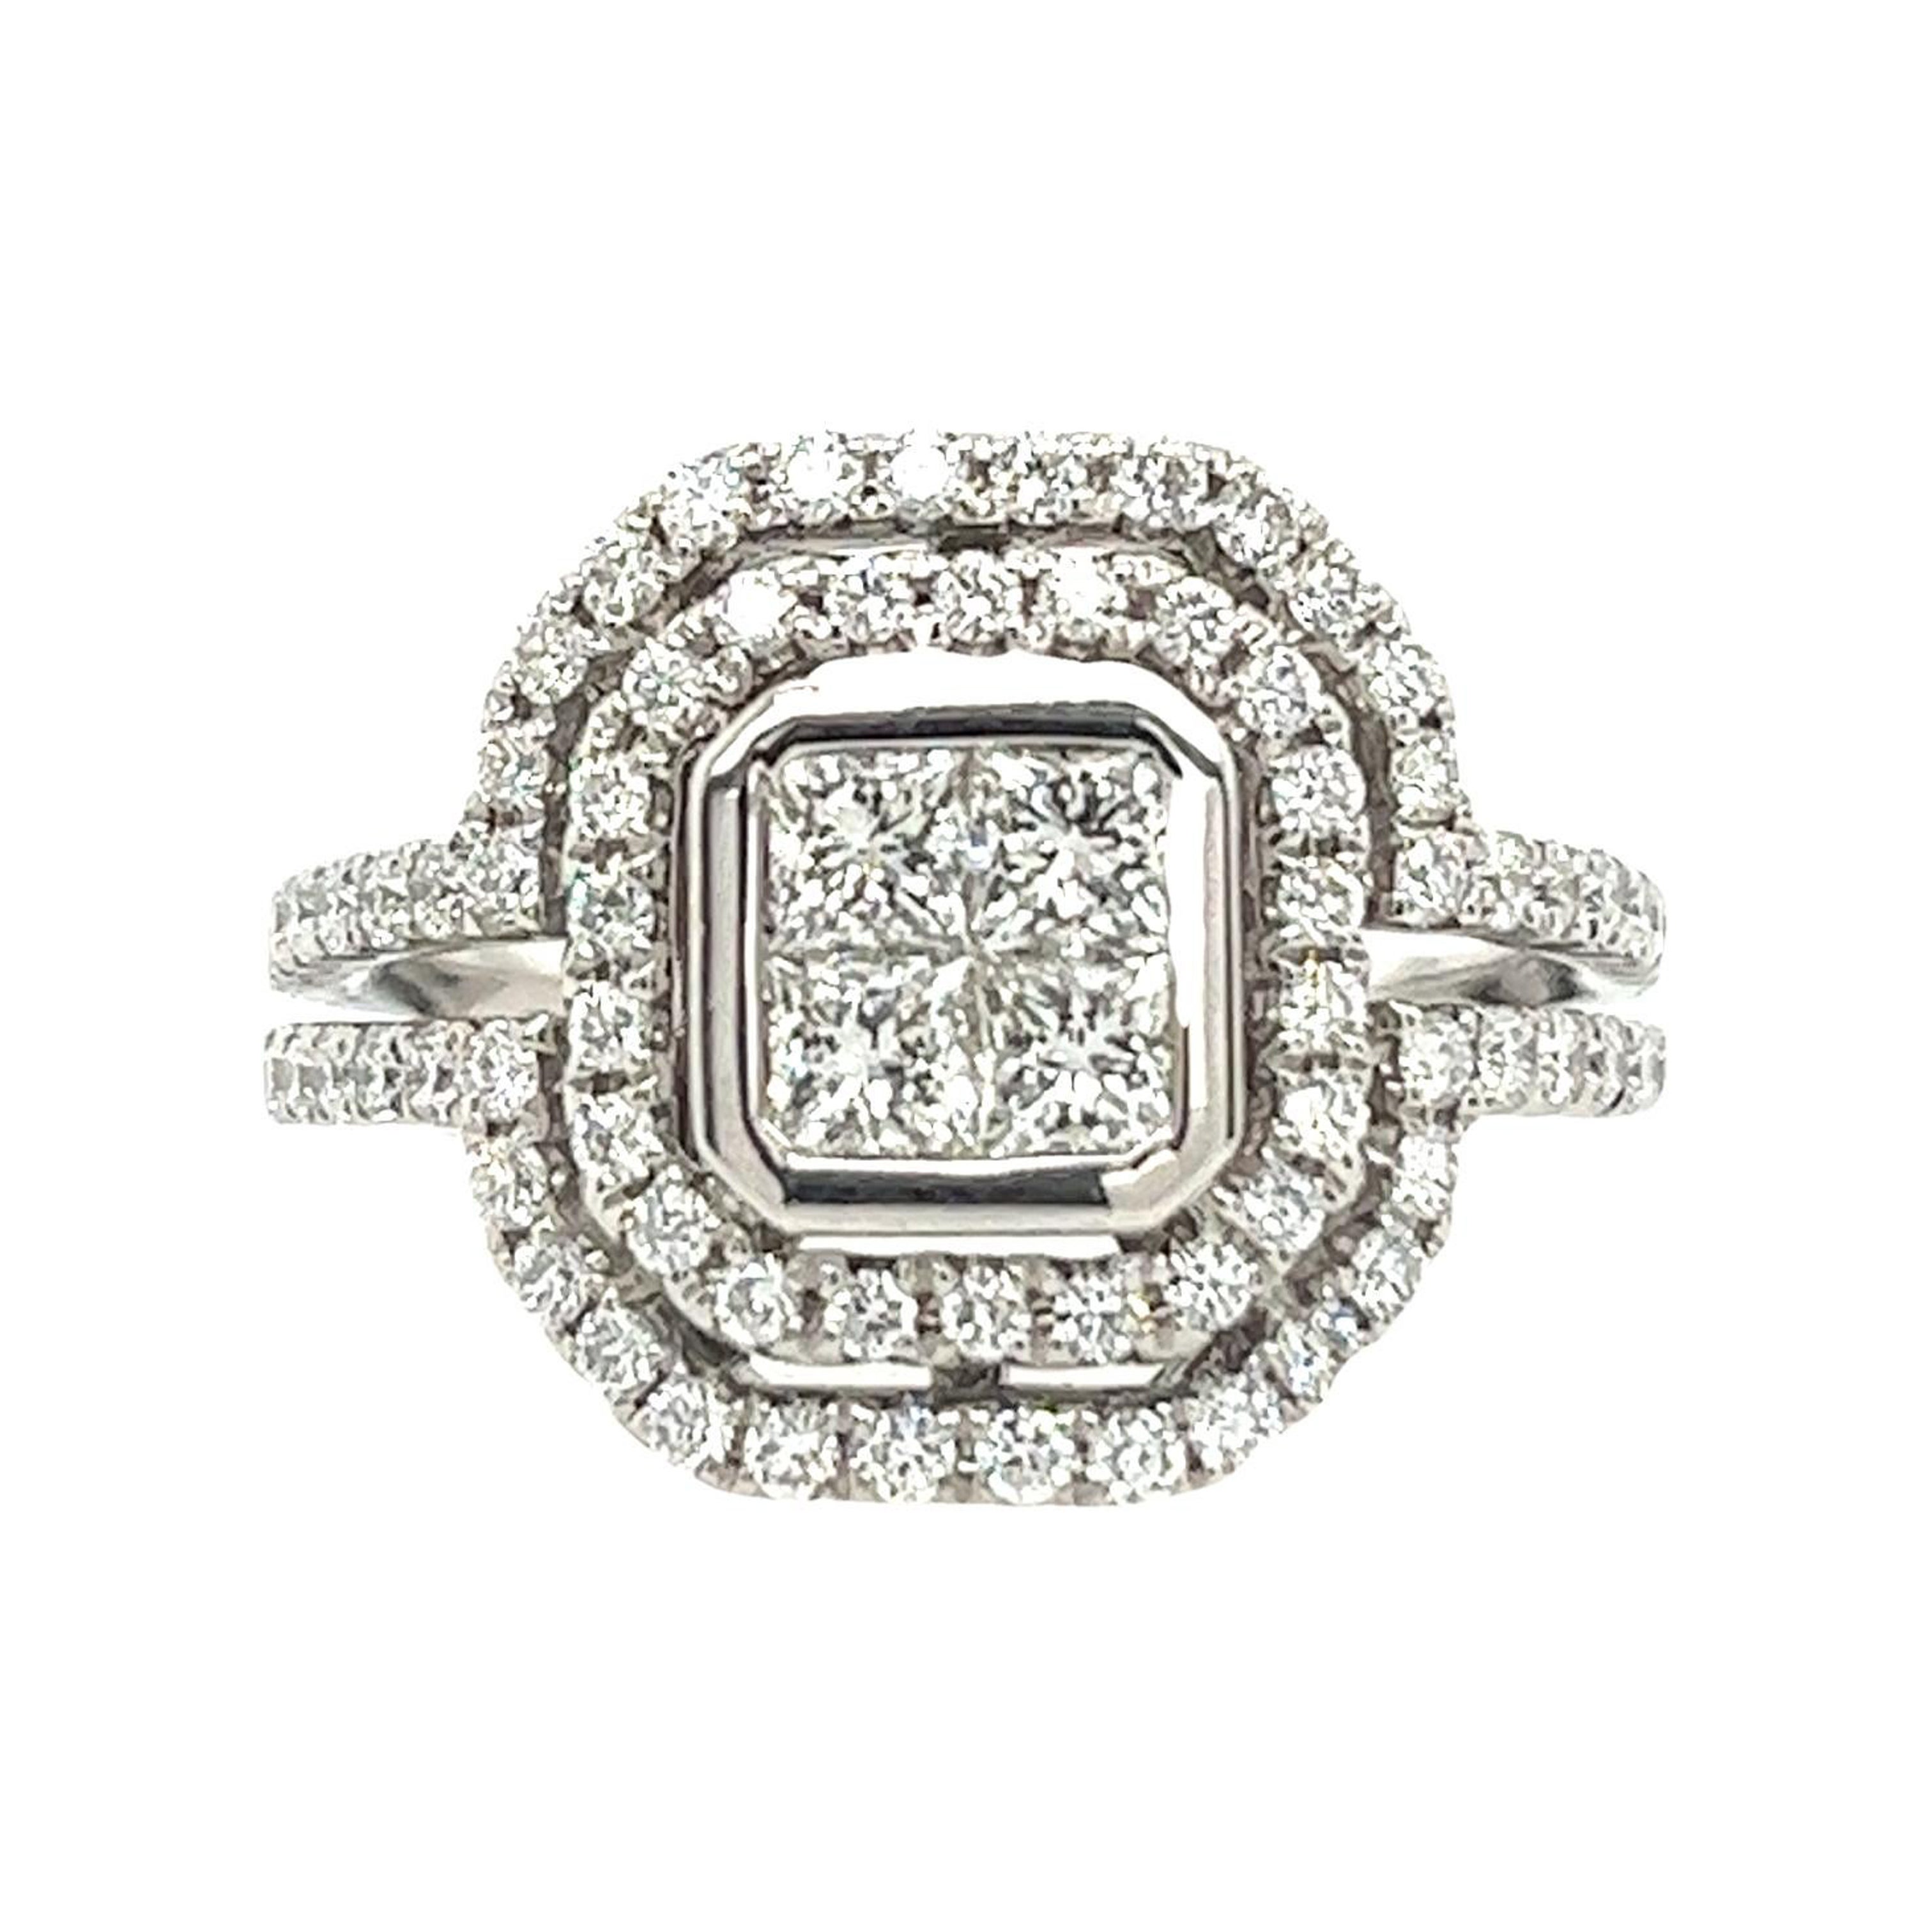 14ct White Gold Cluster Diamond Engagement Ring Set With 1.37ct Diamonds